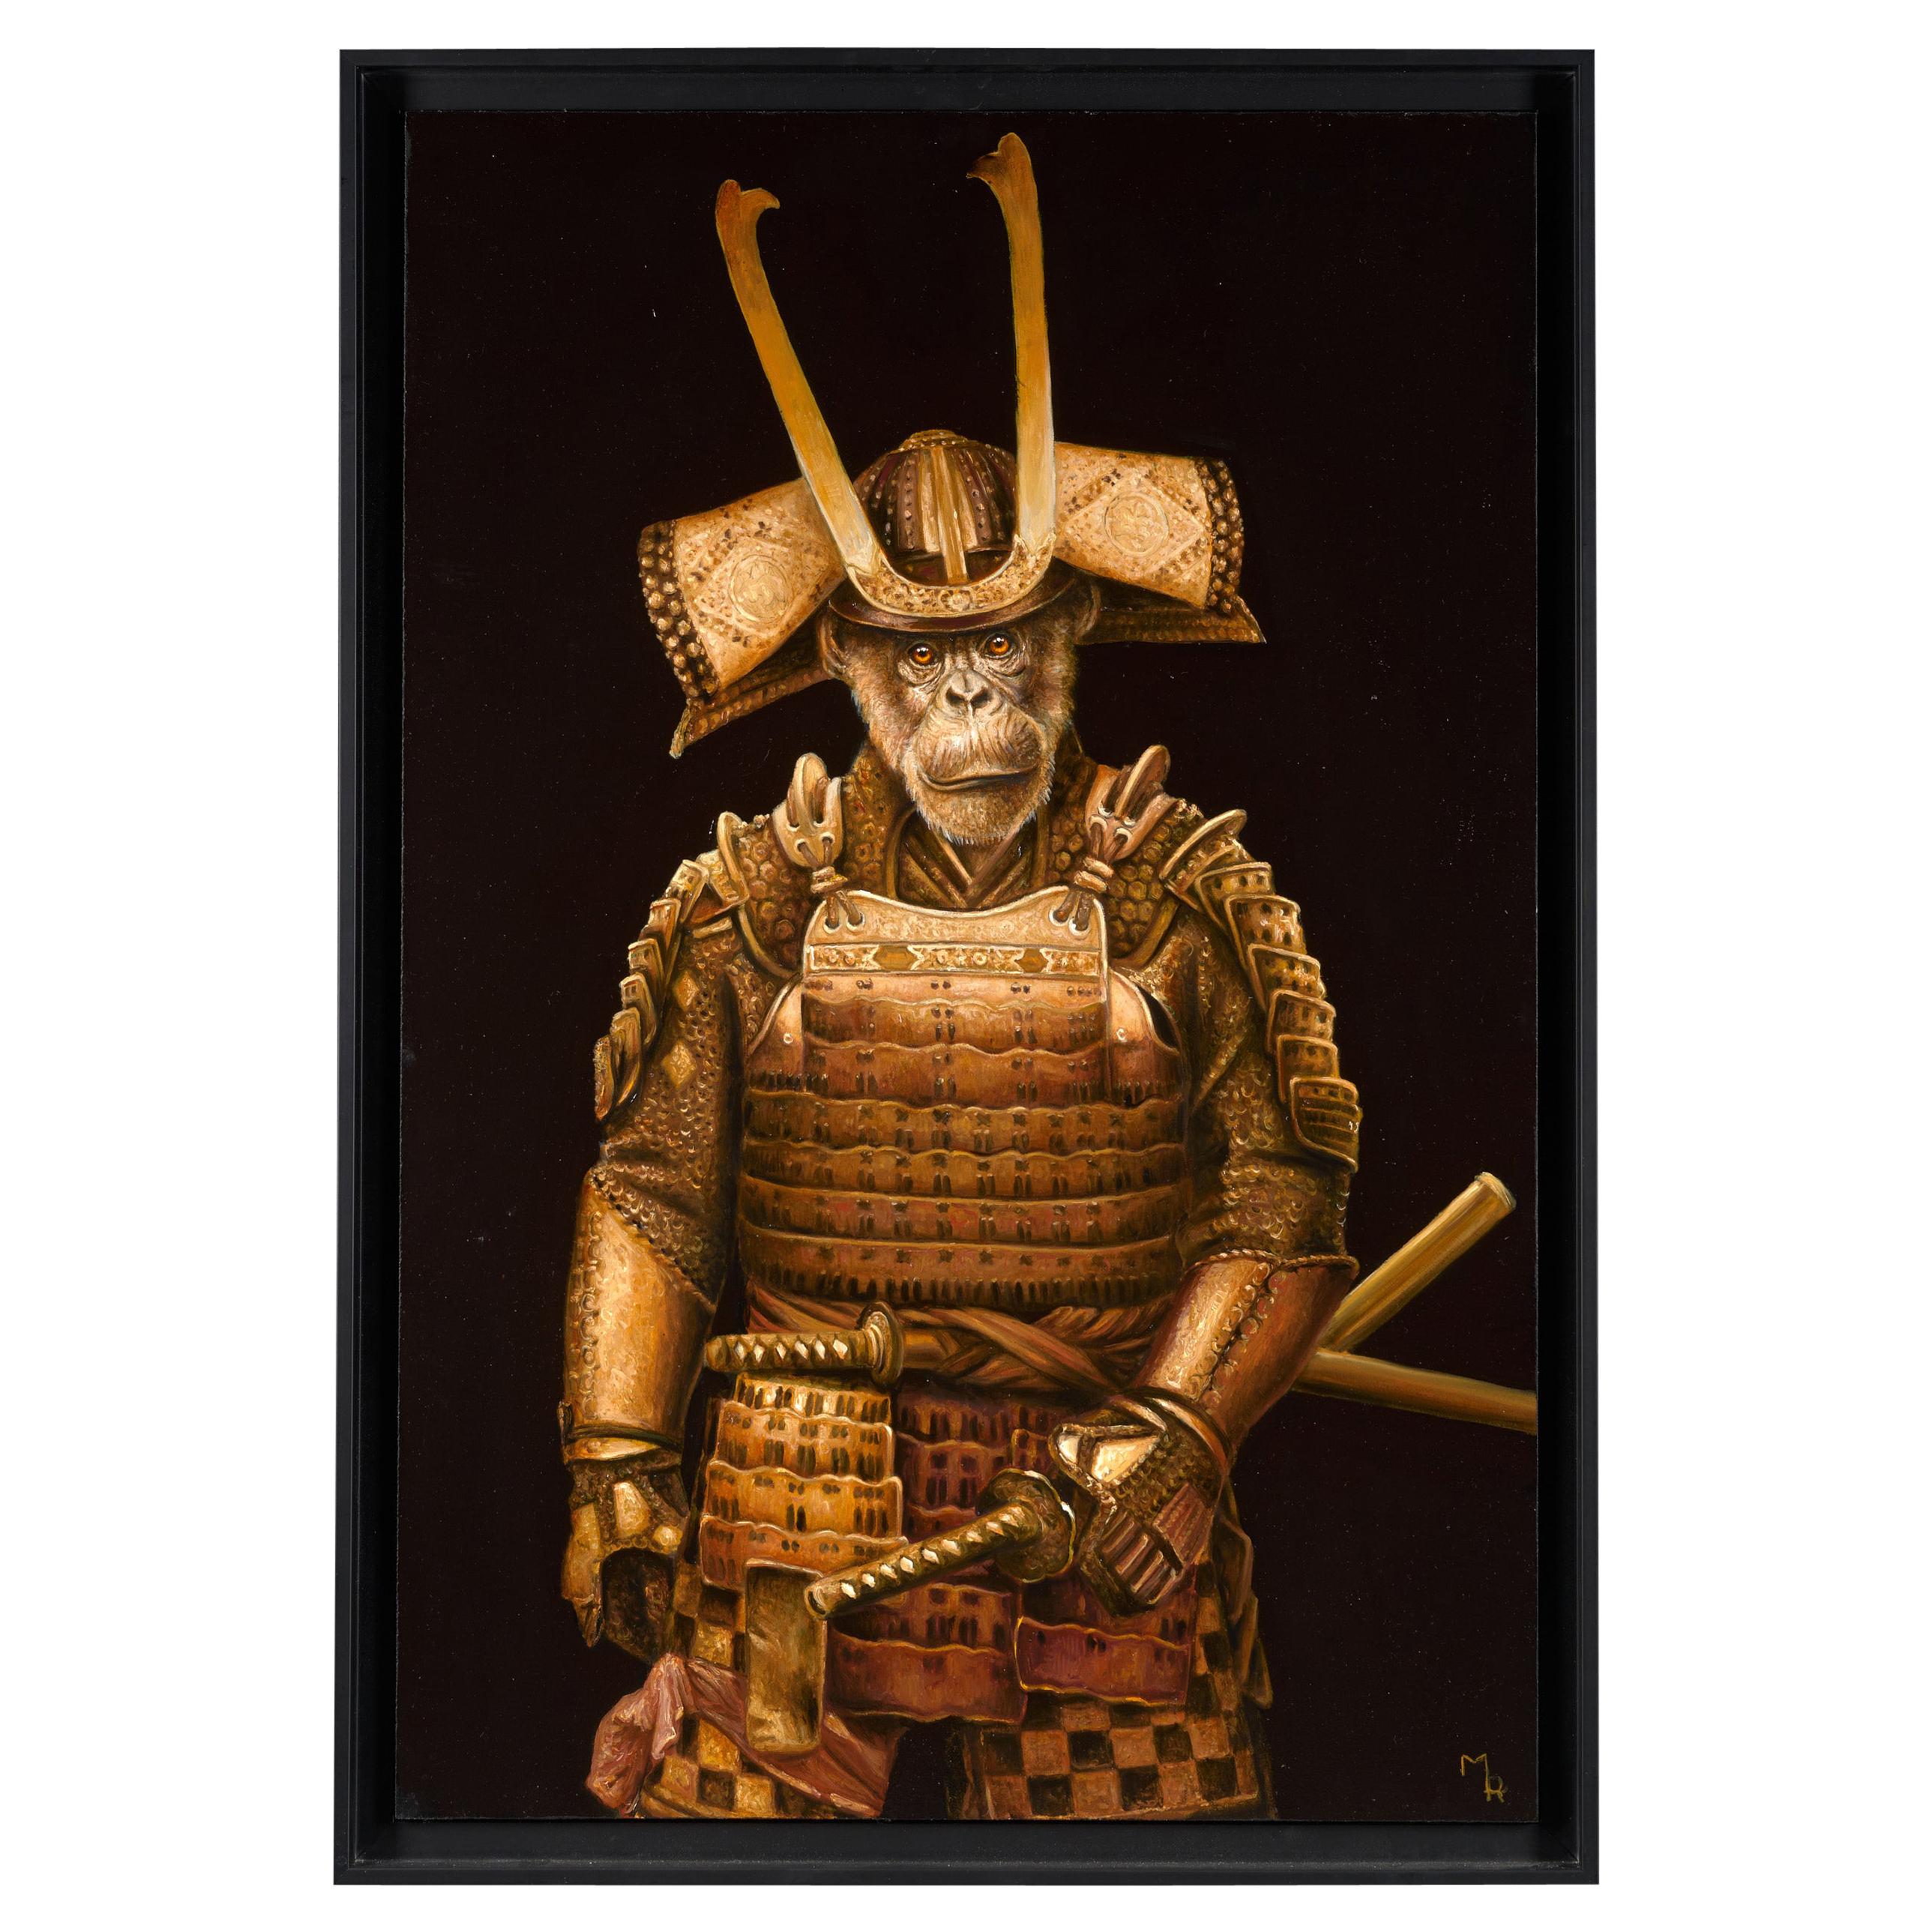 Marc Le Rest, Samurai Akechi, Oil on Canvas, Framed, Signed and Dated 2018